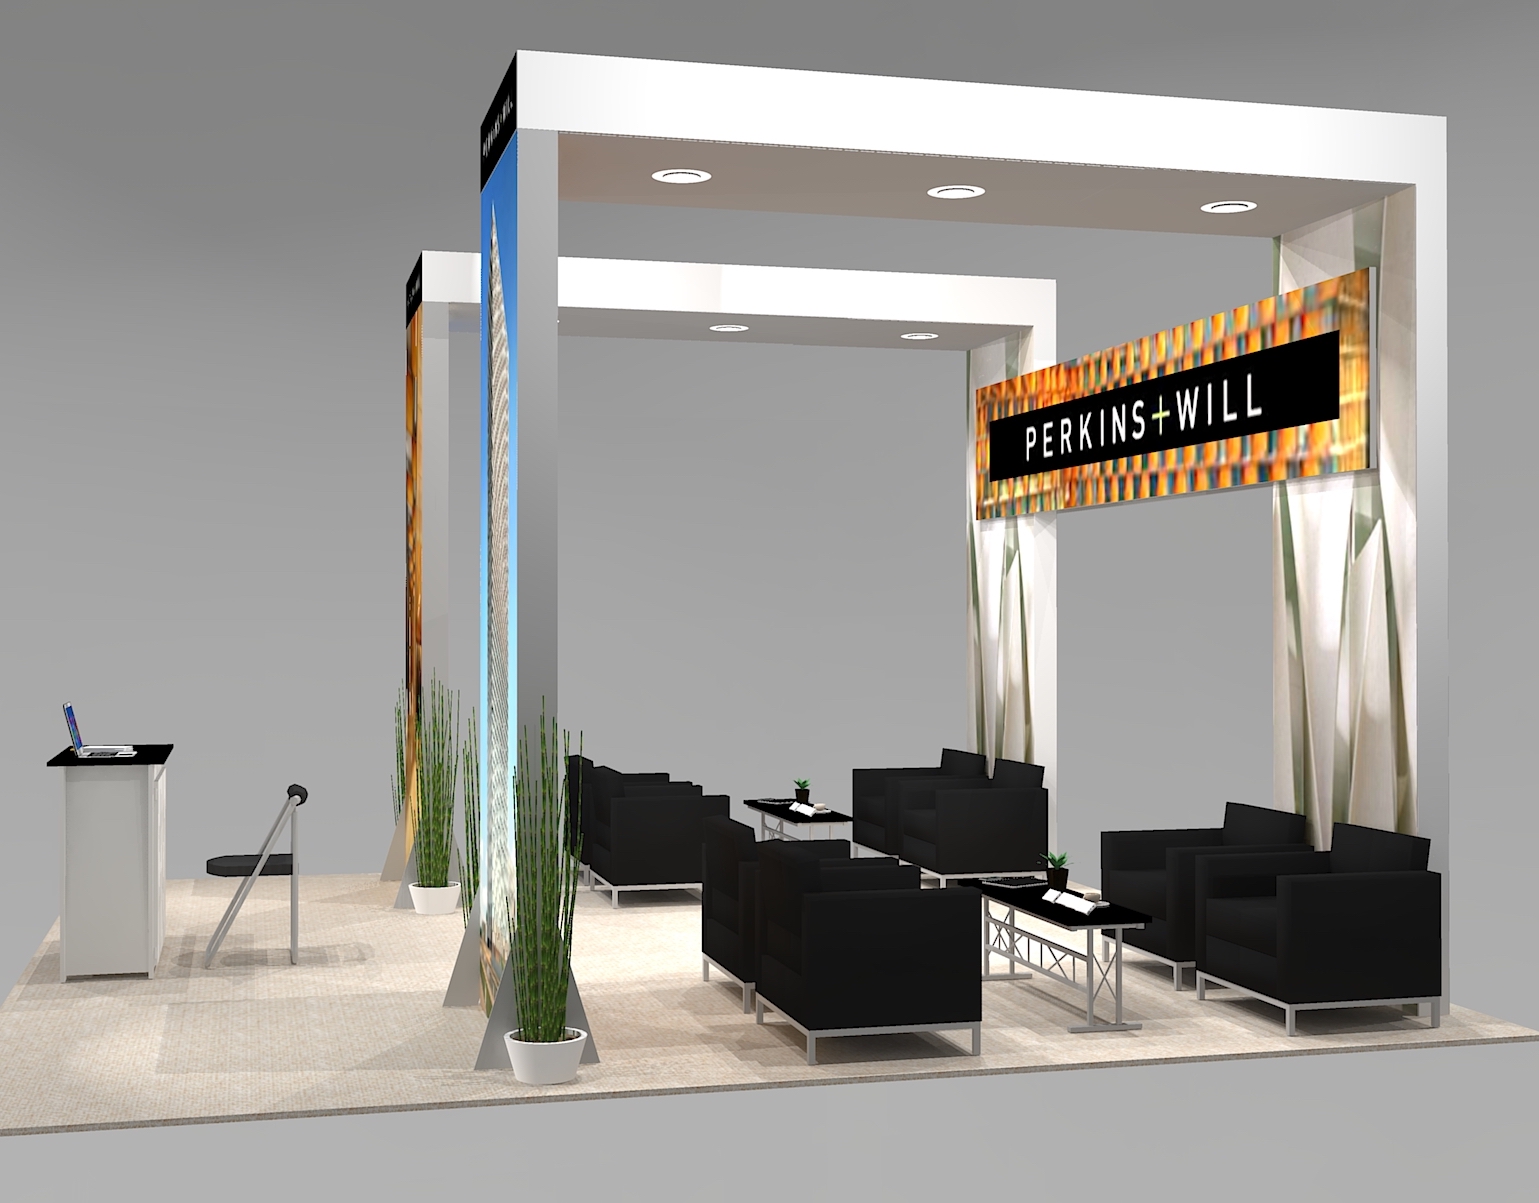 New design for Island trade show booth spaces